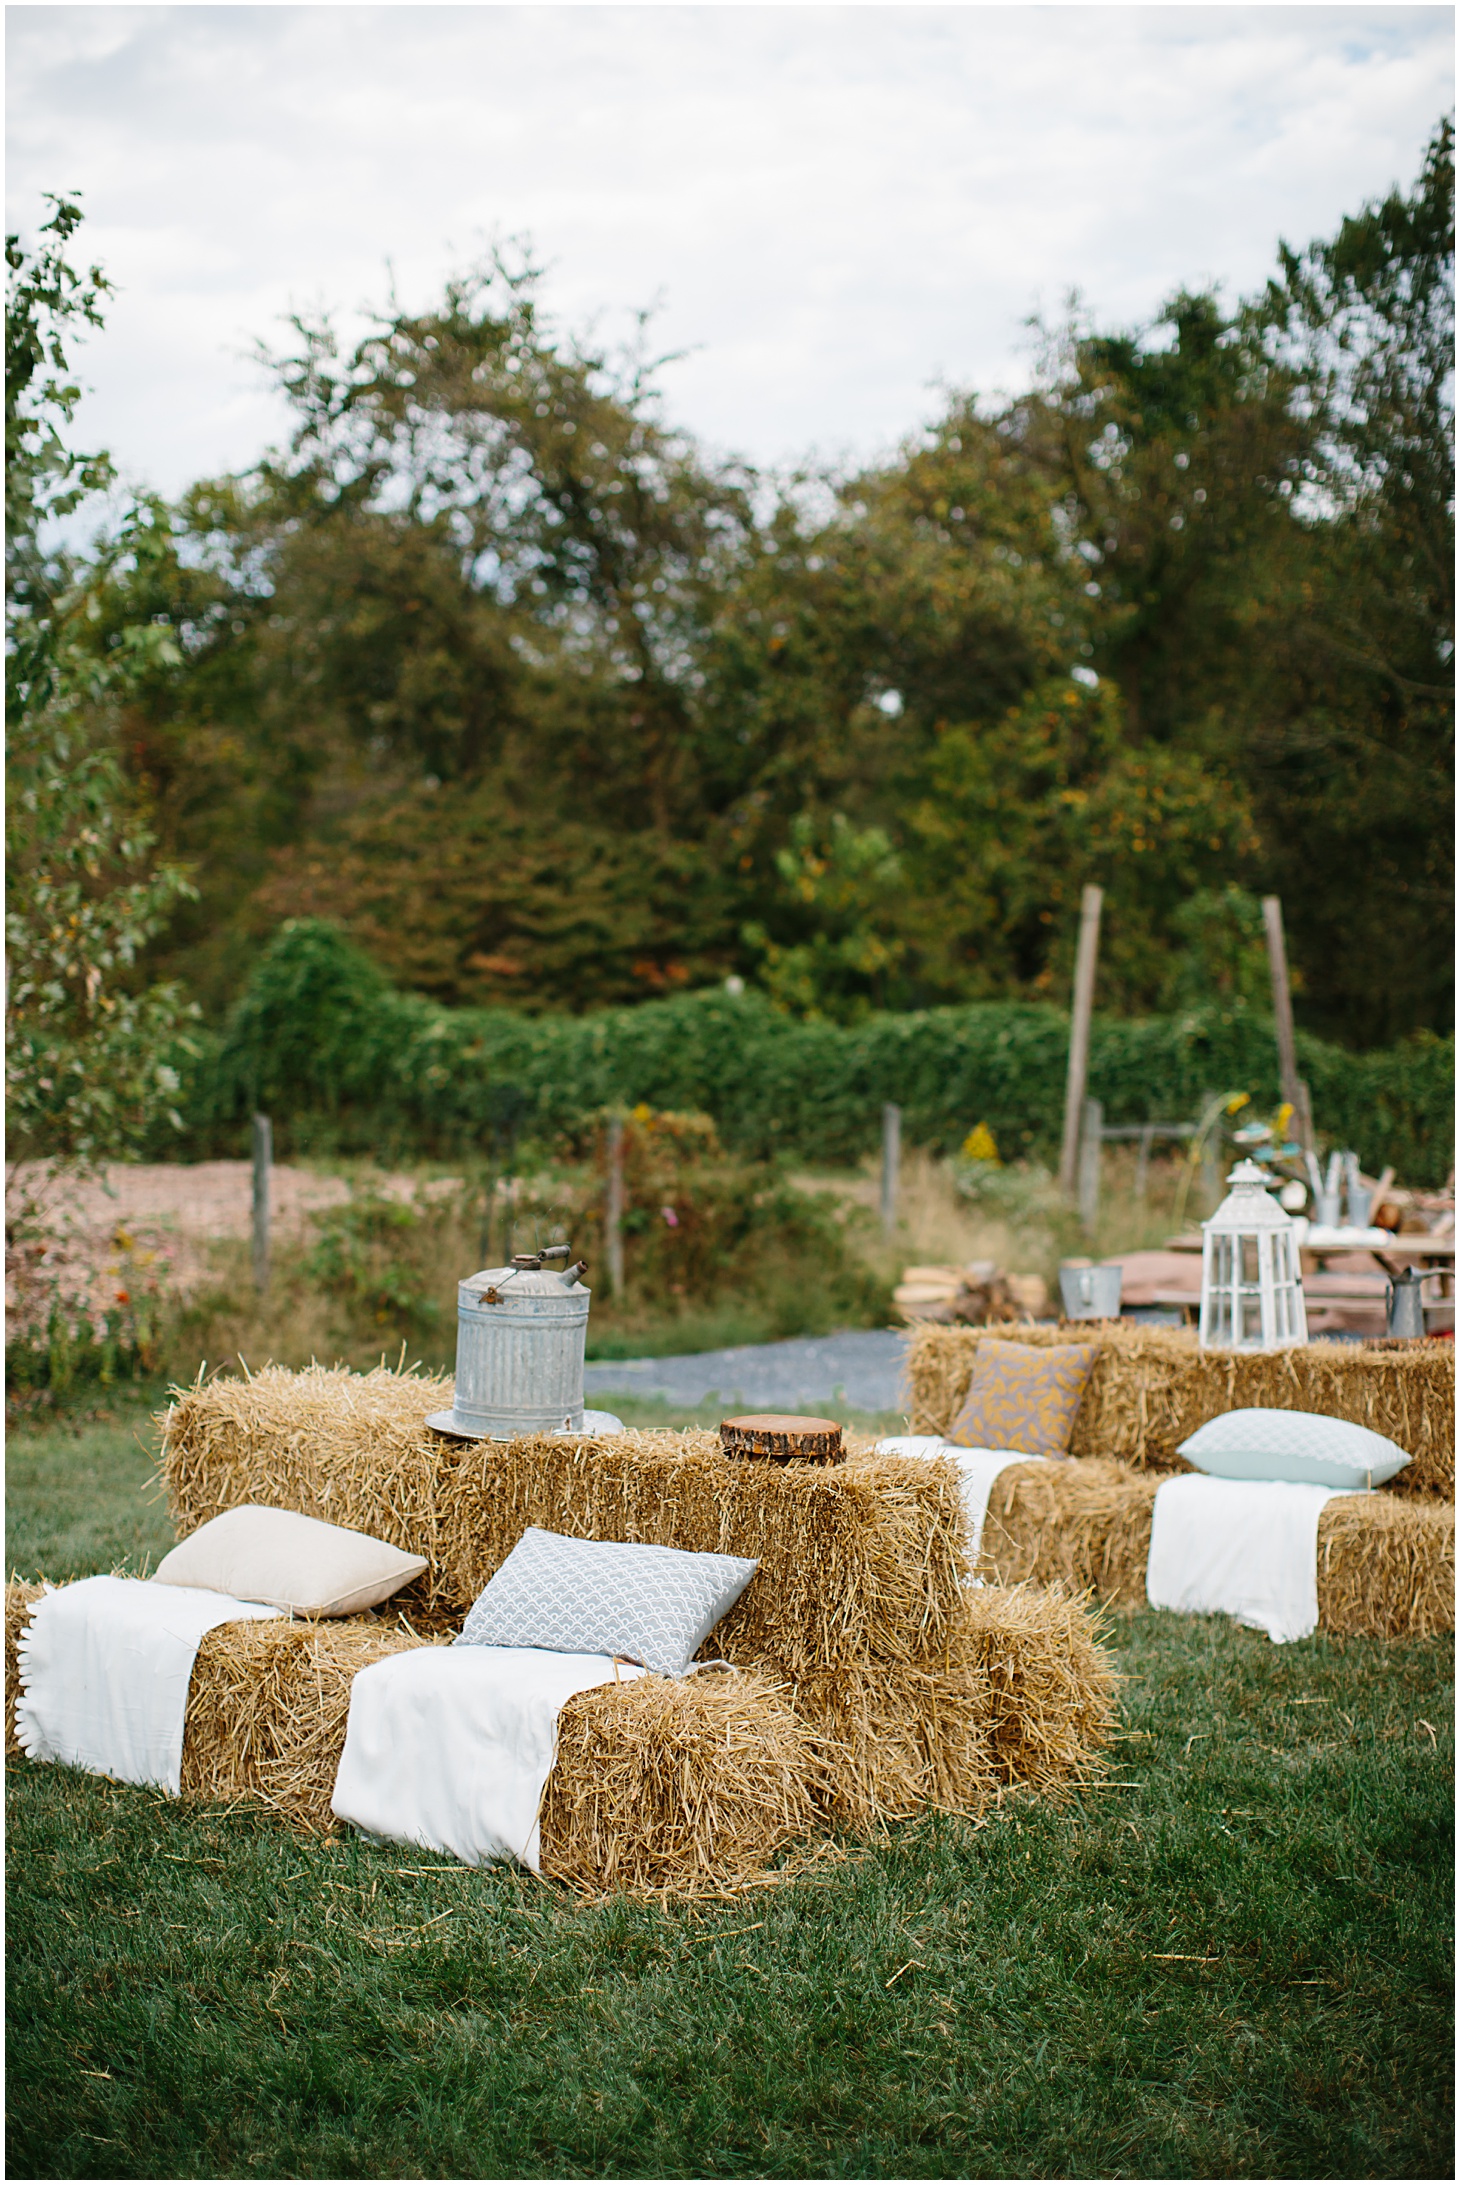 Rustic Floral Wedding at Rocklands Farm & Winery by Sarah Bradshaw Photography_0039